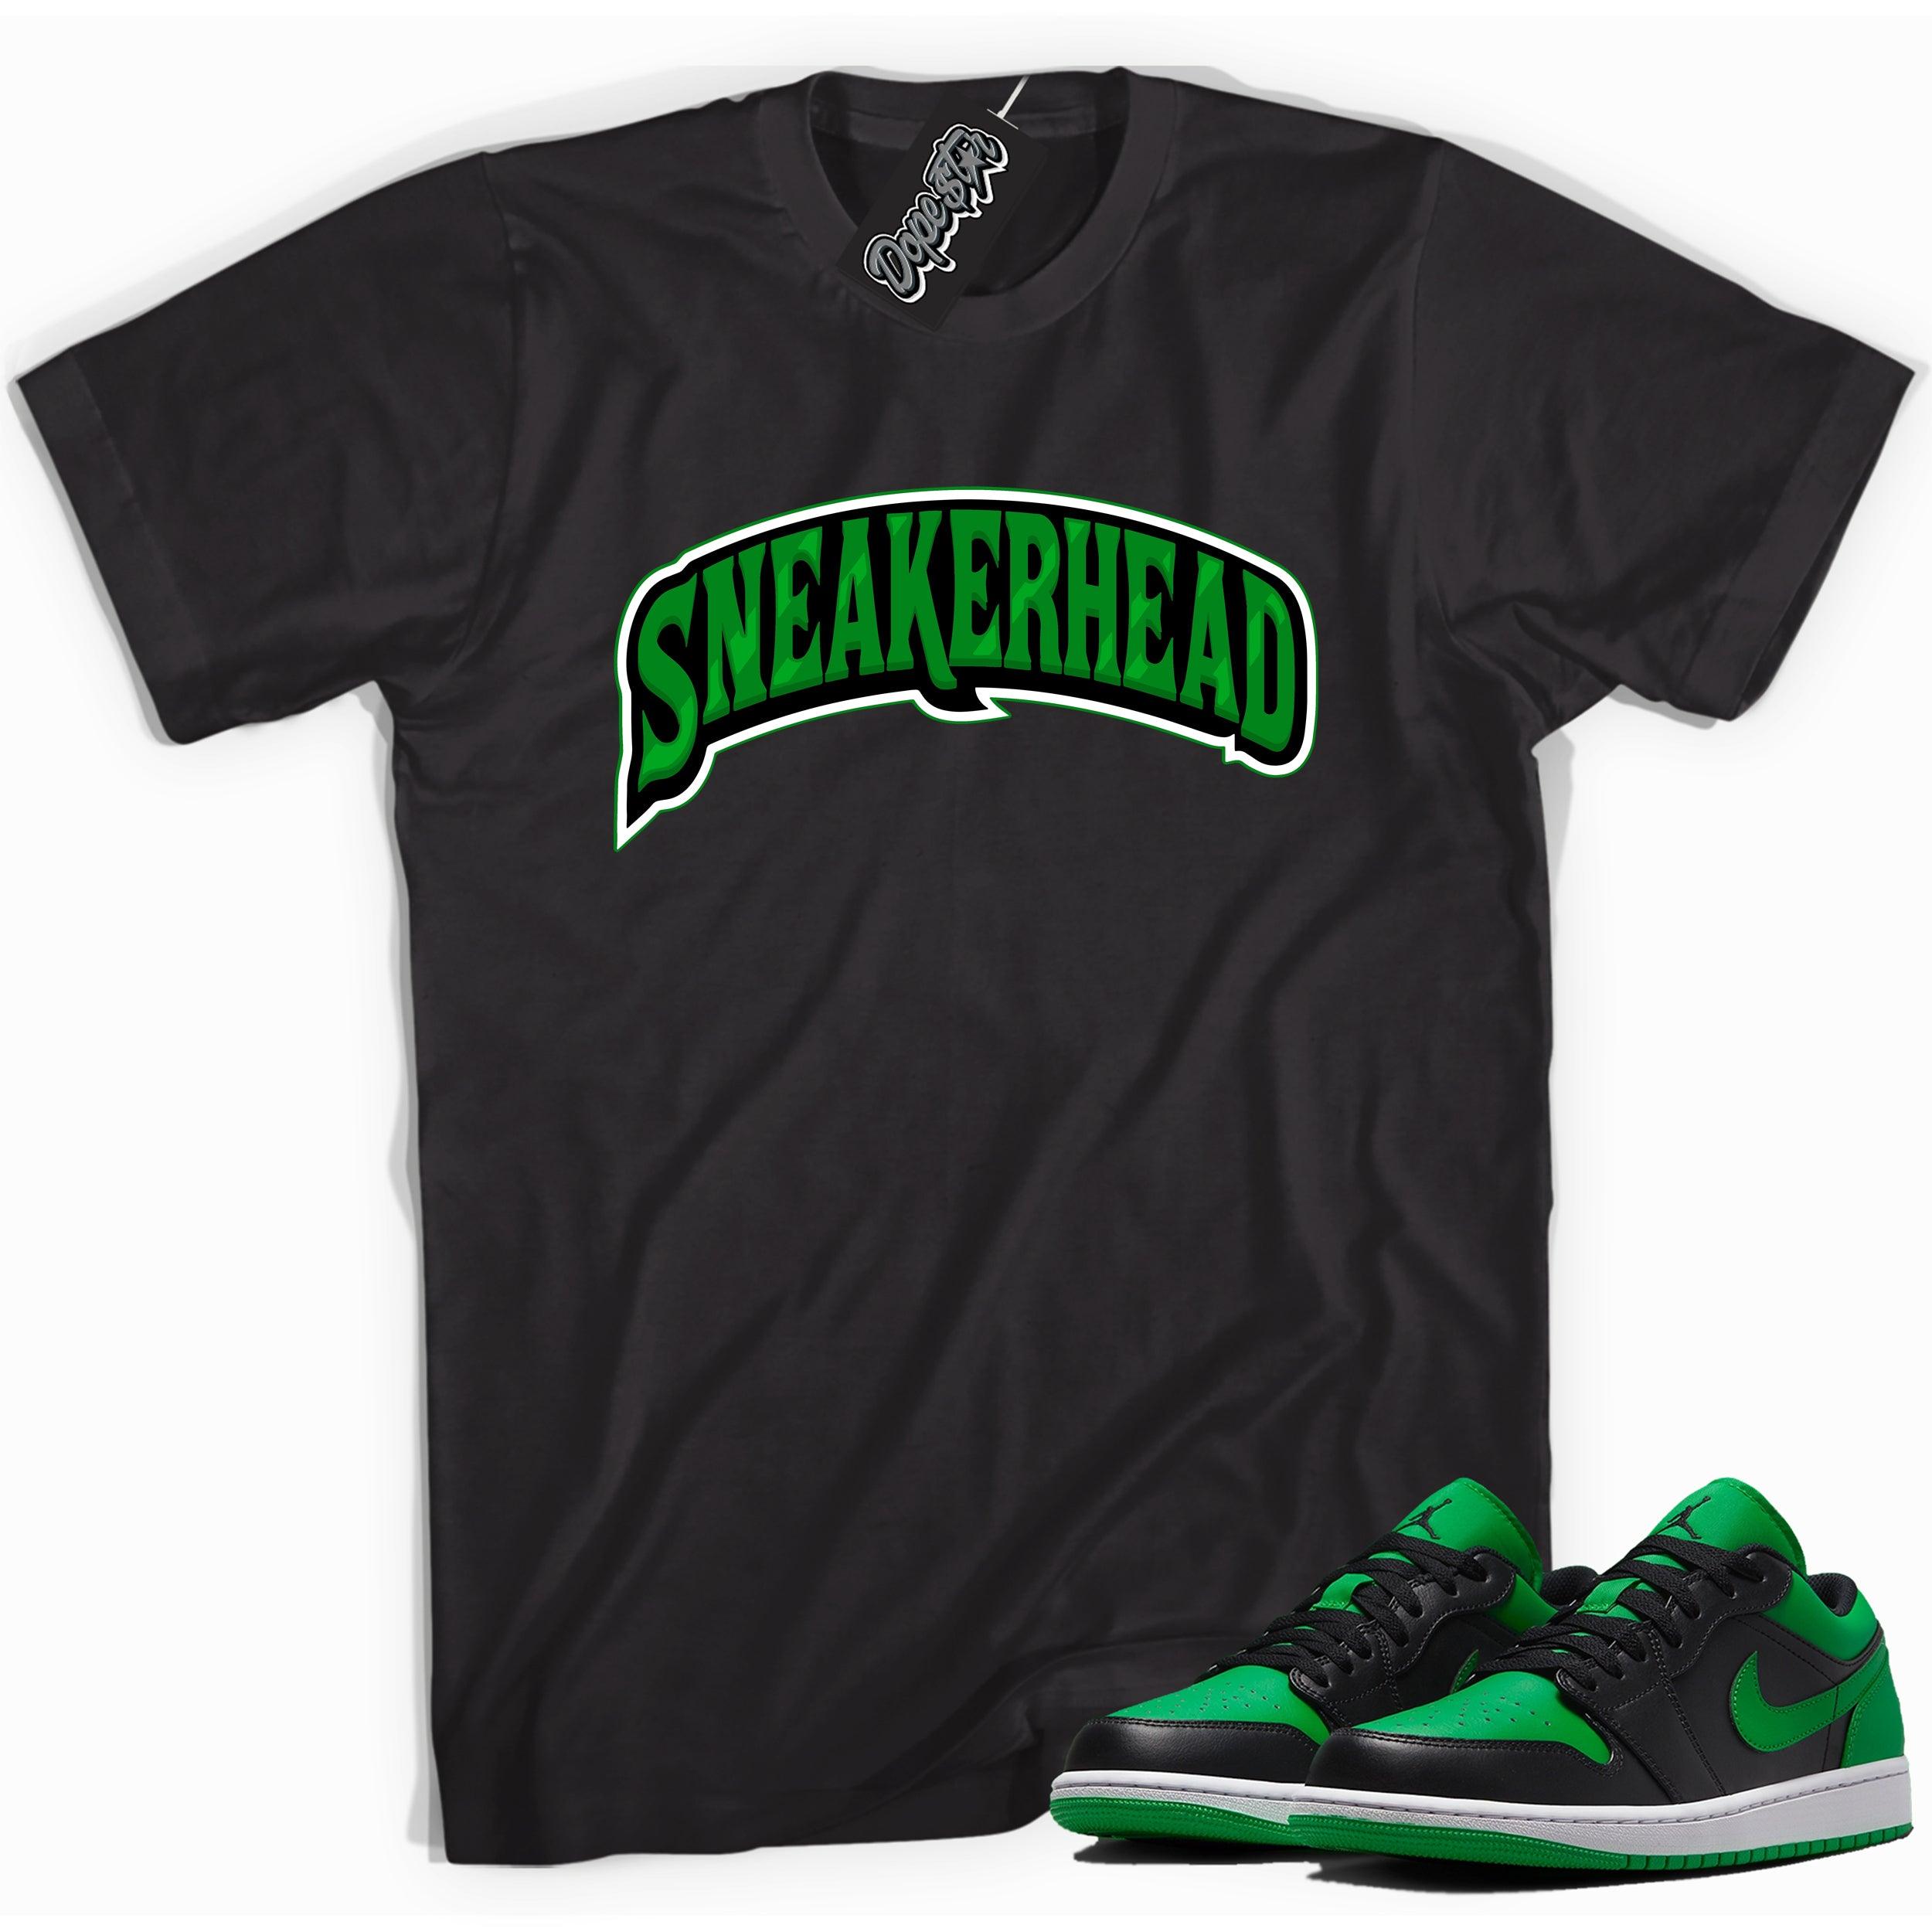 Cool black graphic tee with 'sneaker head' print, that perfectly matches Air Jordan 1 Low Lucky Green sneakers